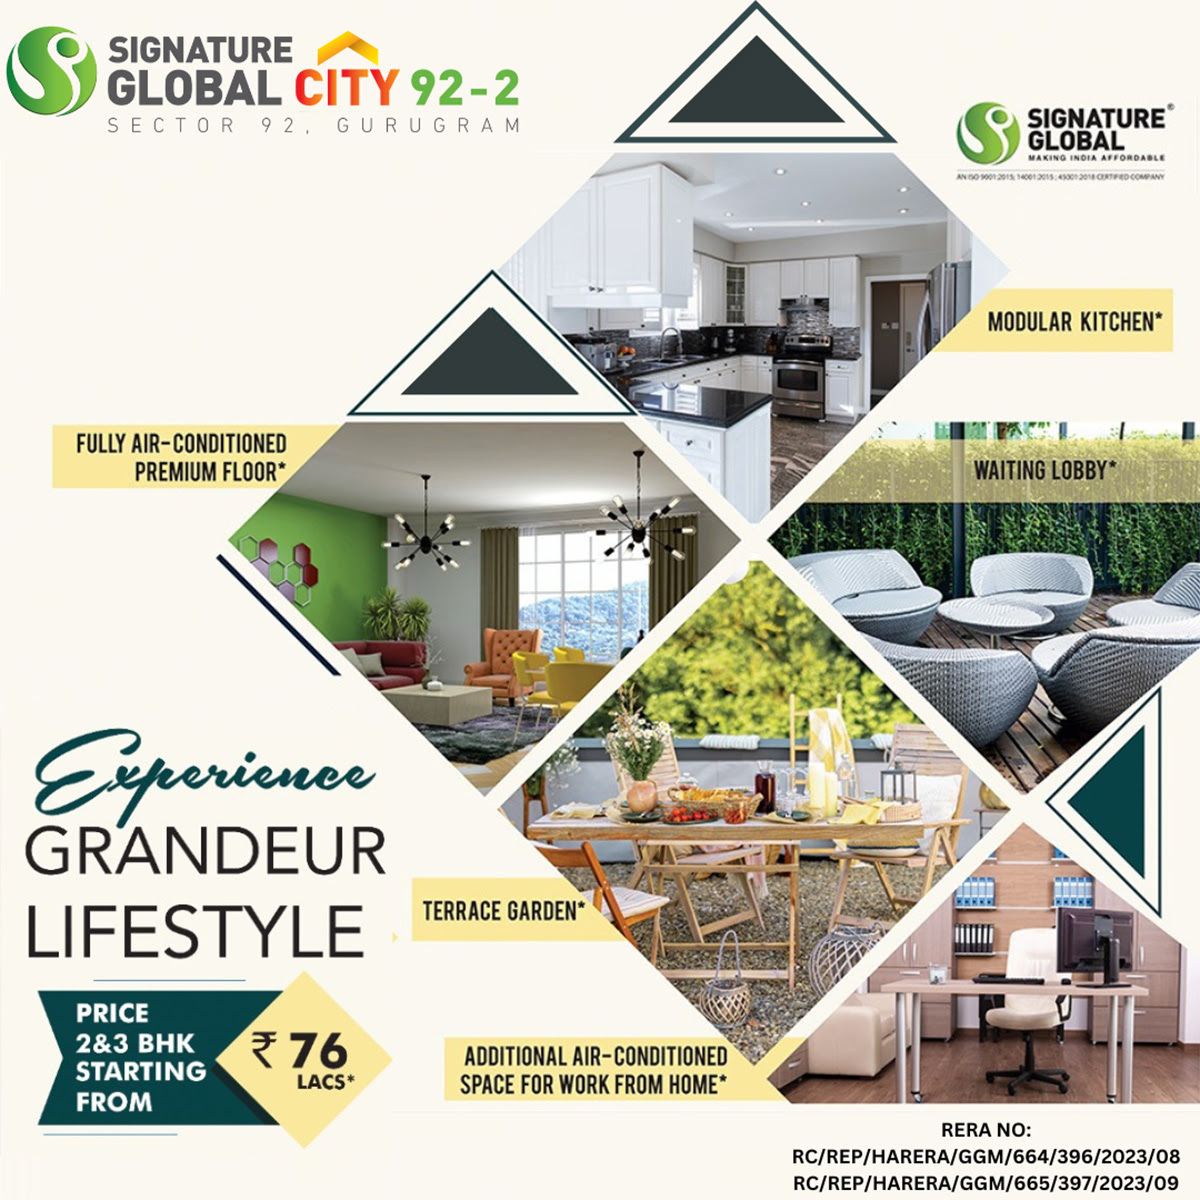 Book with Rs 1 Lac & get benefit of Rs 4 Lac at Signature Global City 92-2, Gurgaon Update